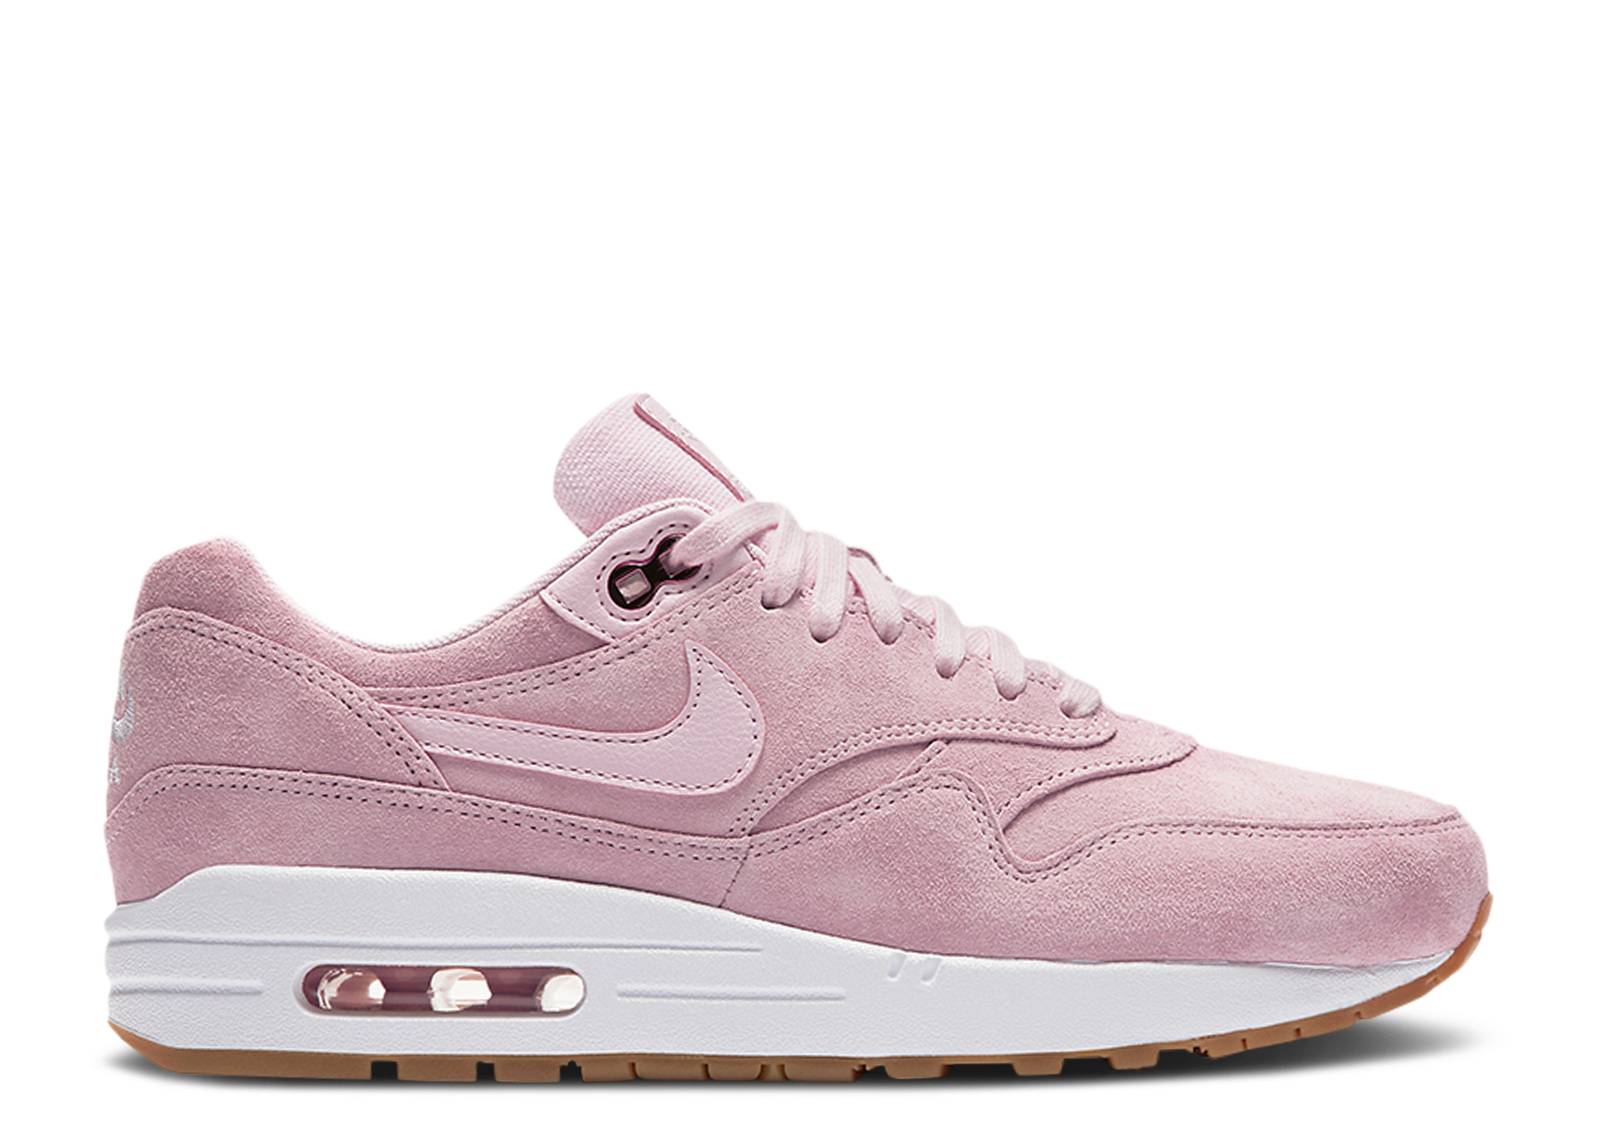 Wmns Air Max 1 SD 'Prism Pink'